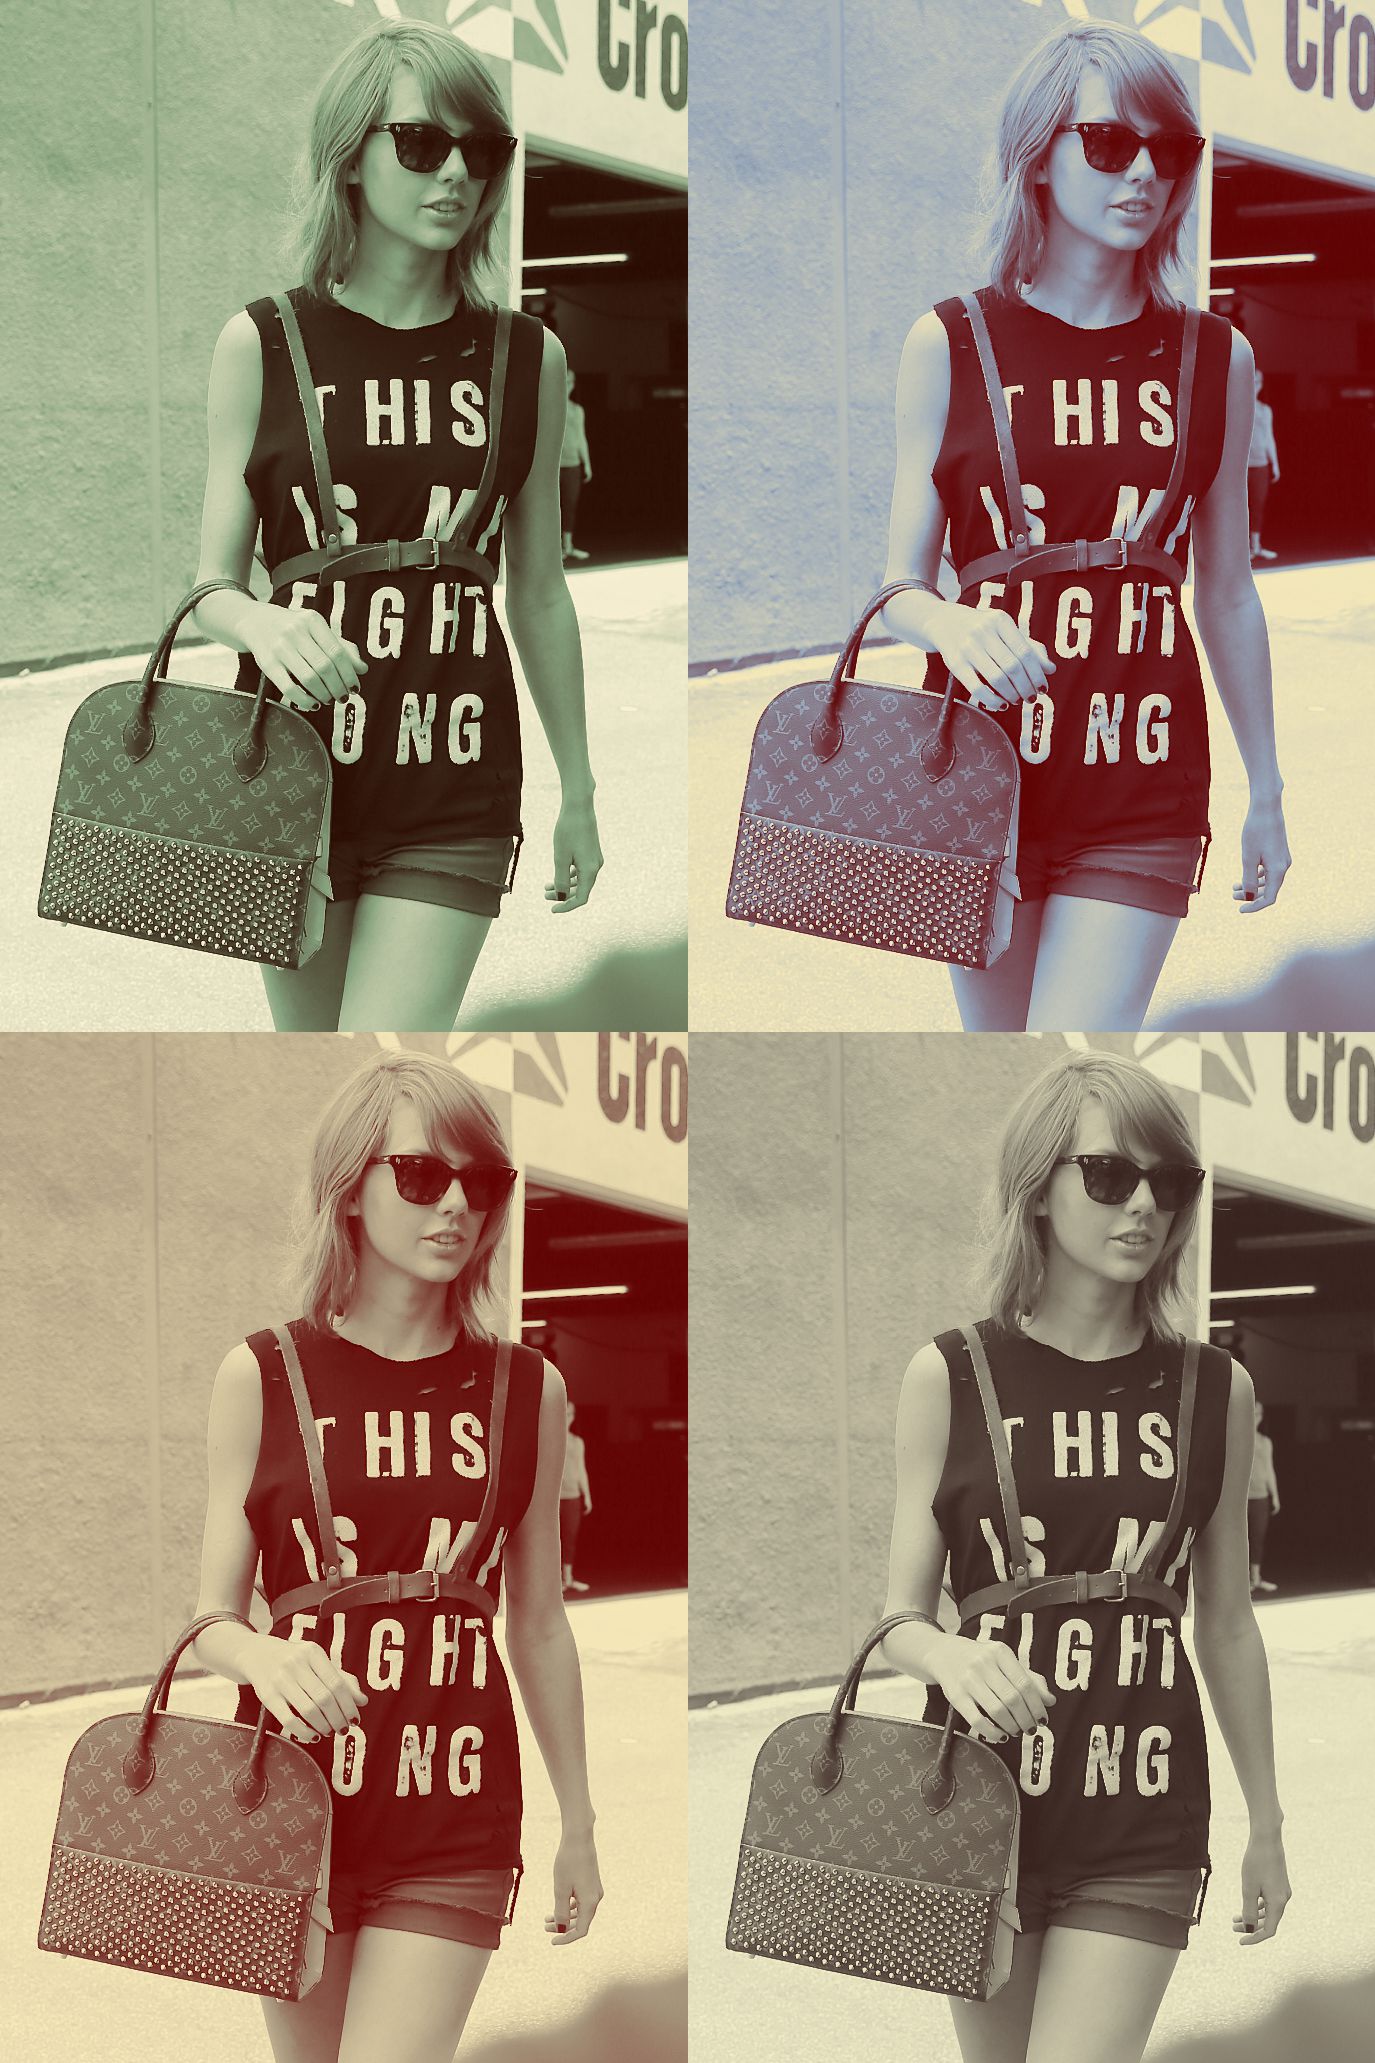 Taylor Swift holding Louis Vuitton purse | Ladyclever